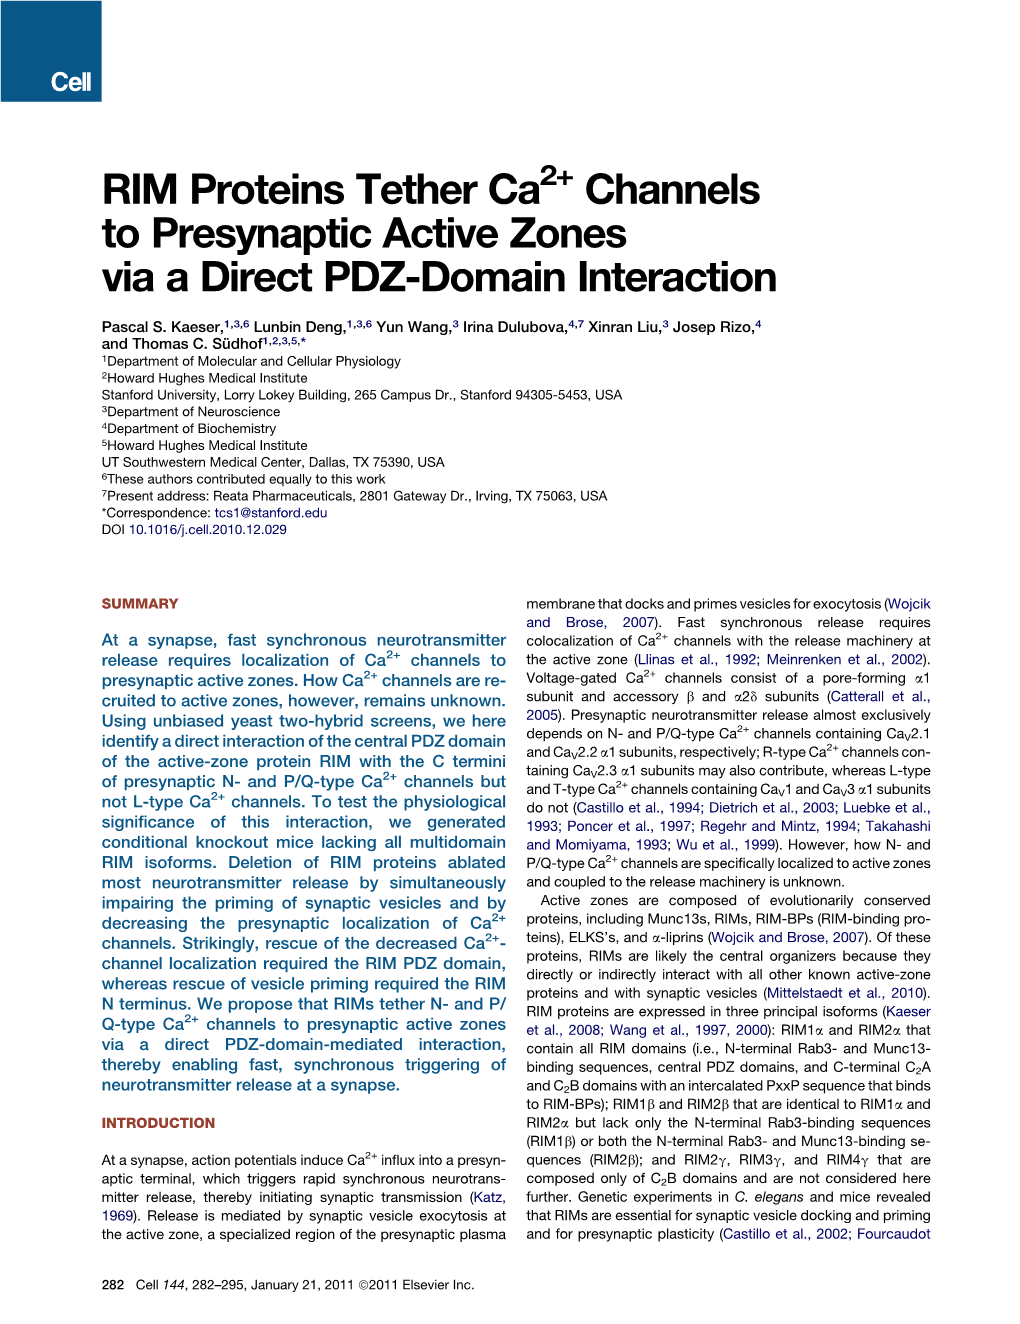 RIM Proteins Tether Ca2+ Channels to Presynaptic Active Zones Via a Direct PDZ-Domain Interaction